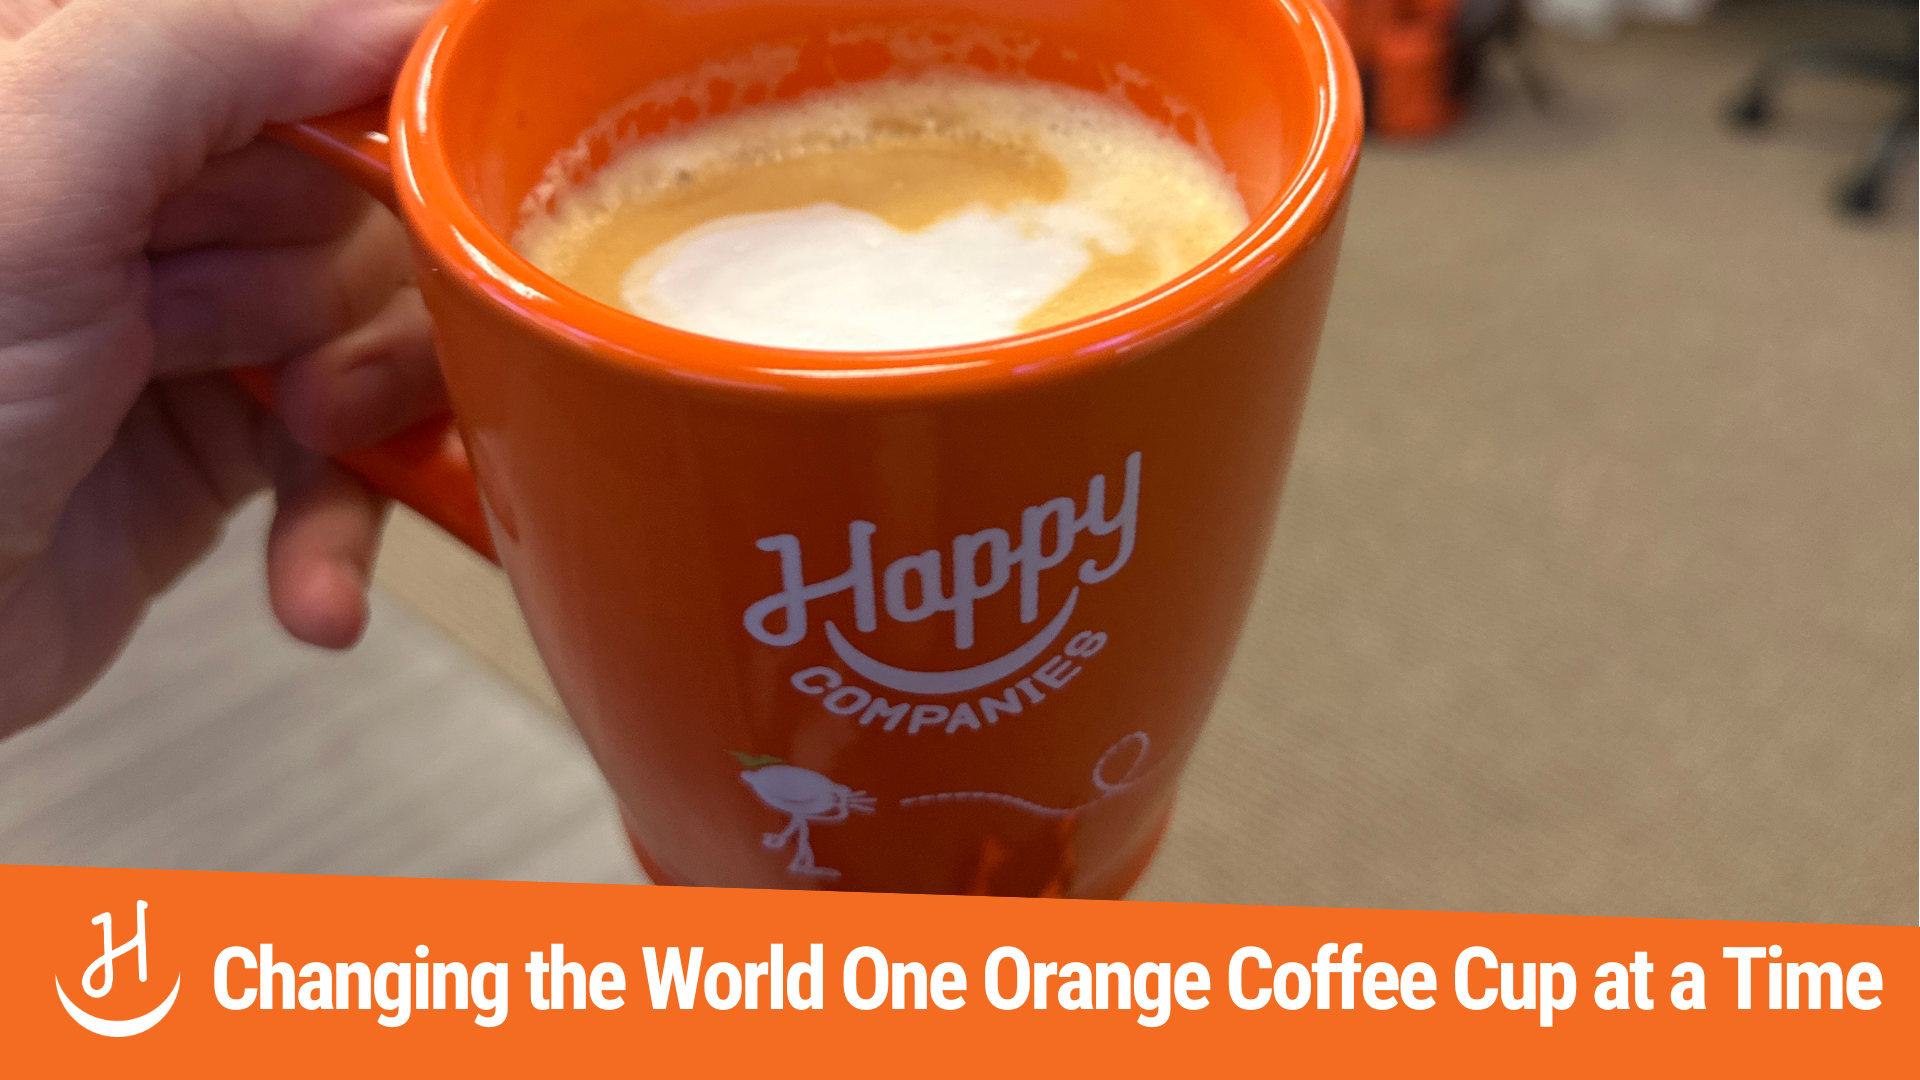 Cover image of the orange Happy coffee cup